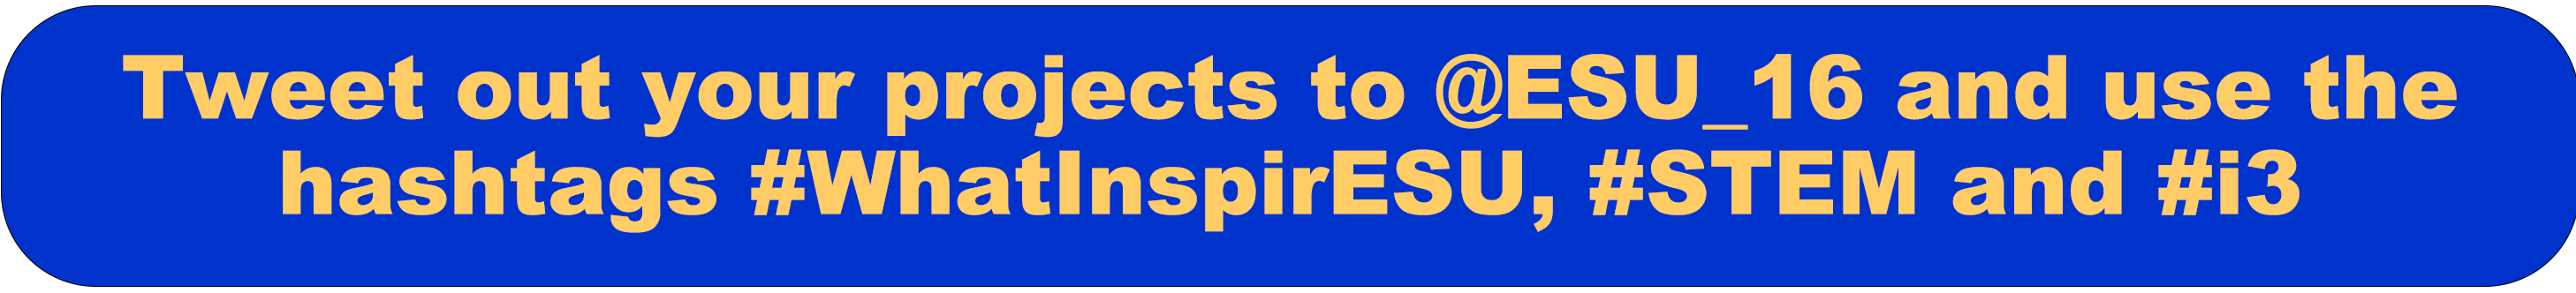 Tweet out your projects to @ESU_16 and use the hashtags #WhatInspirESU, #STEM, and #i3